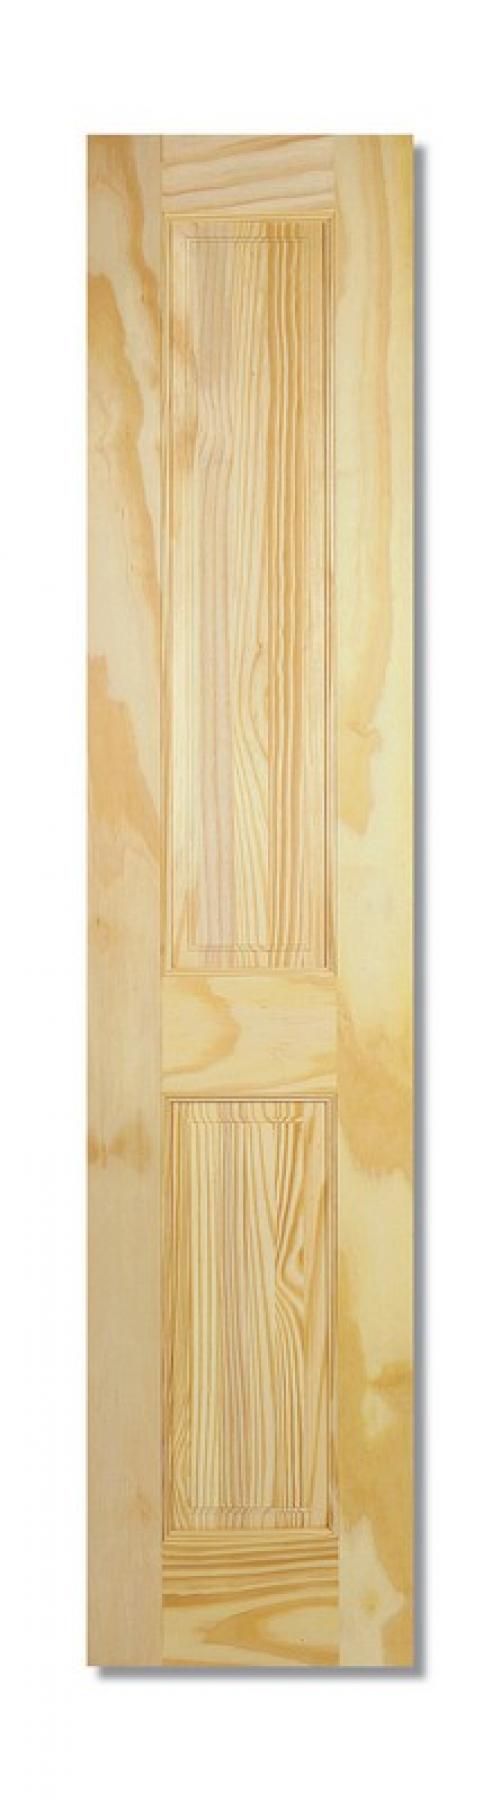 Image for 78X21 2 PANEL CLEAR PINE